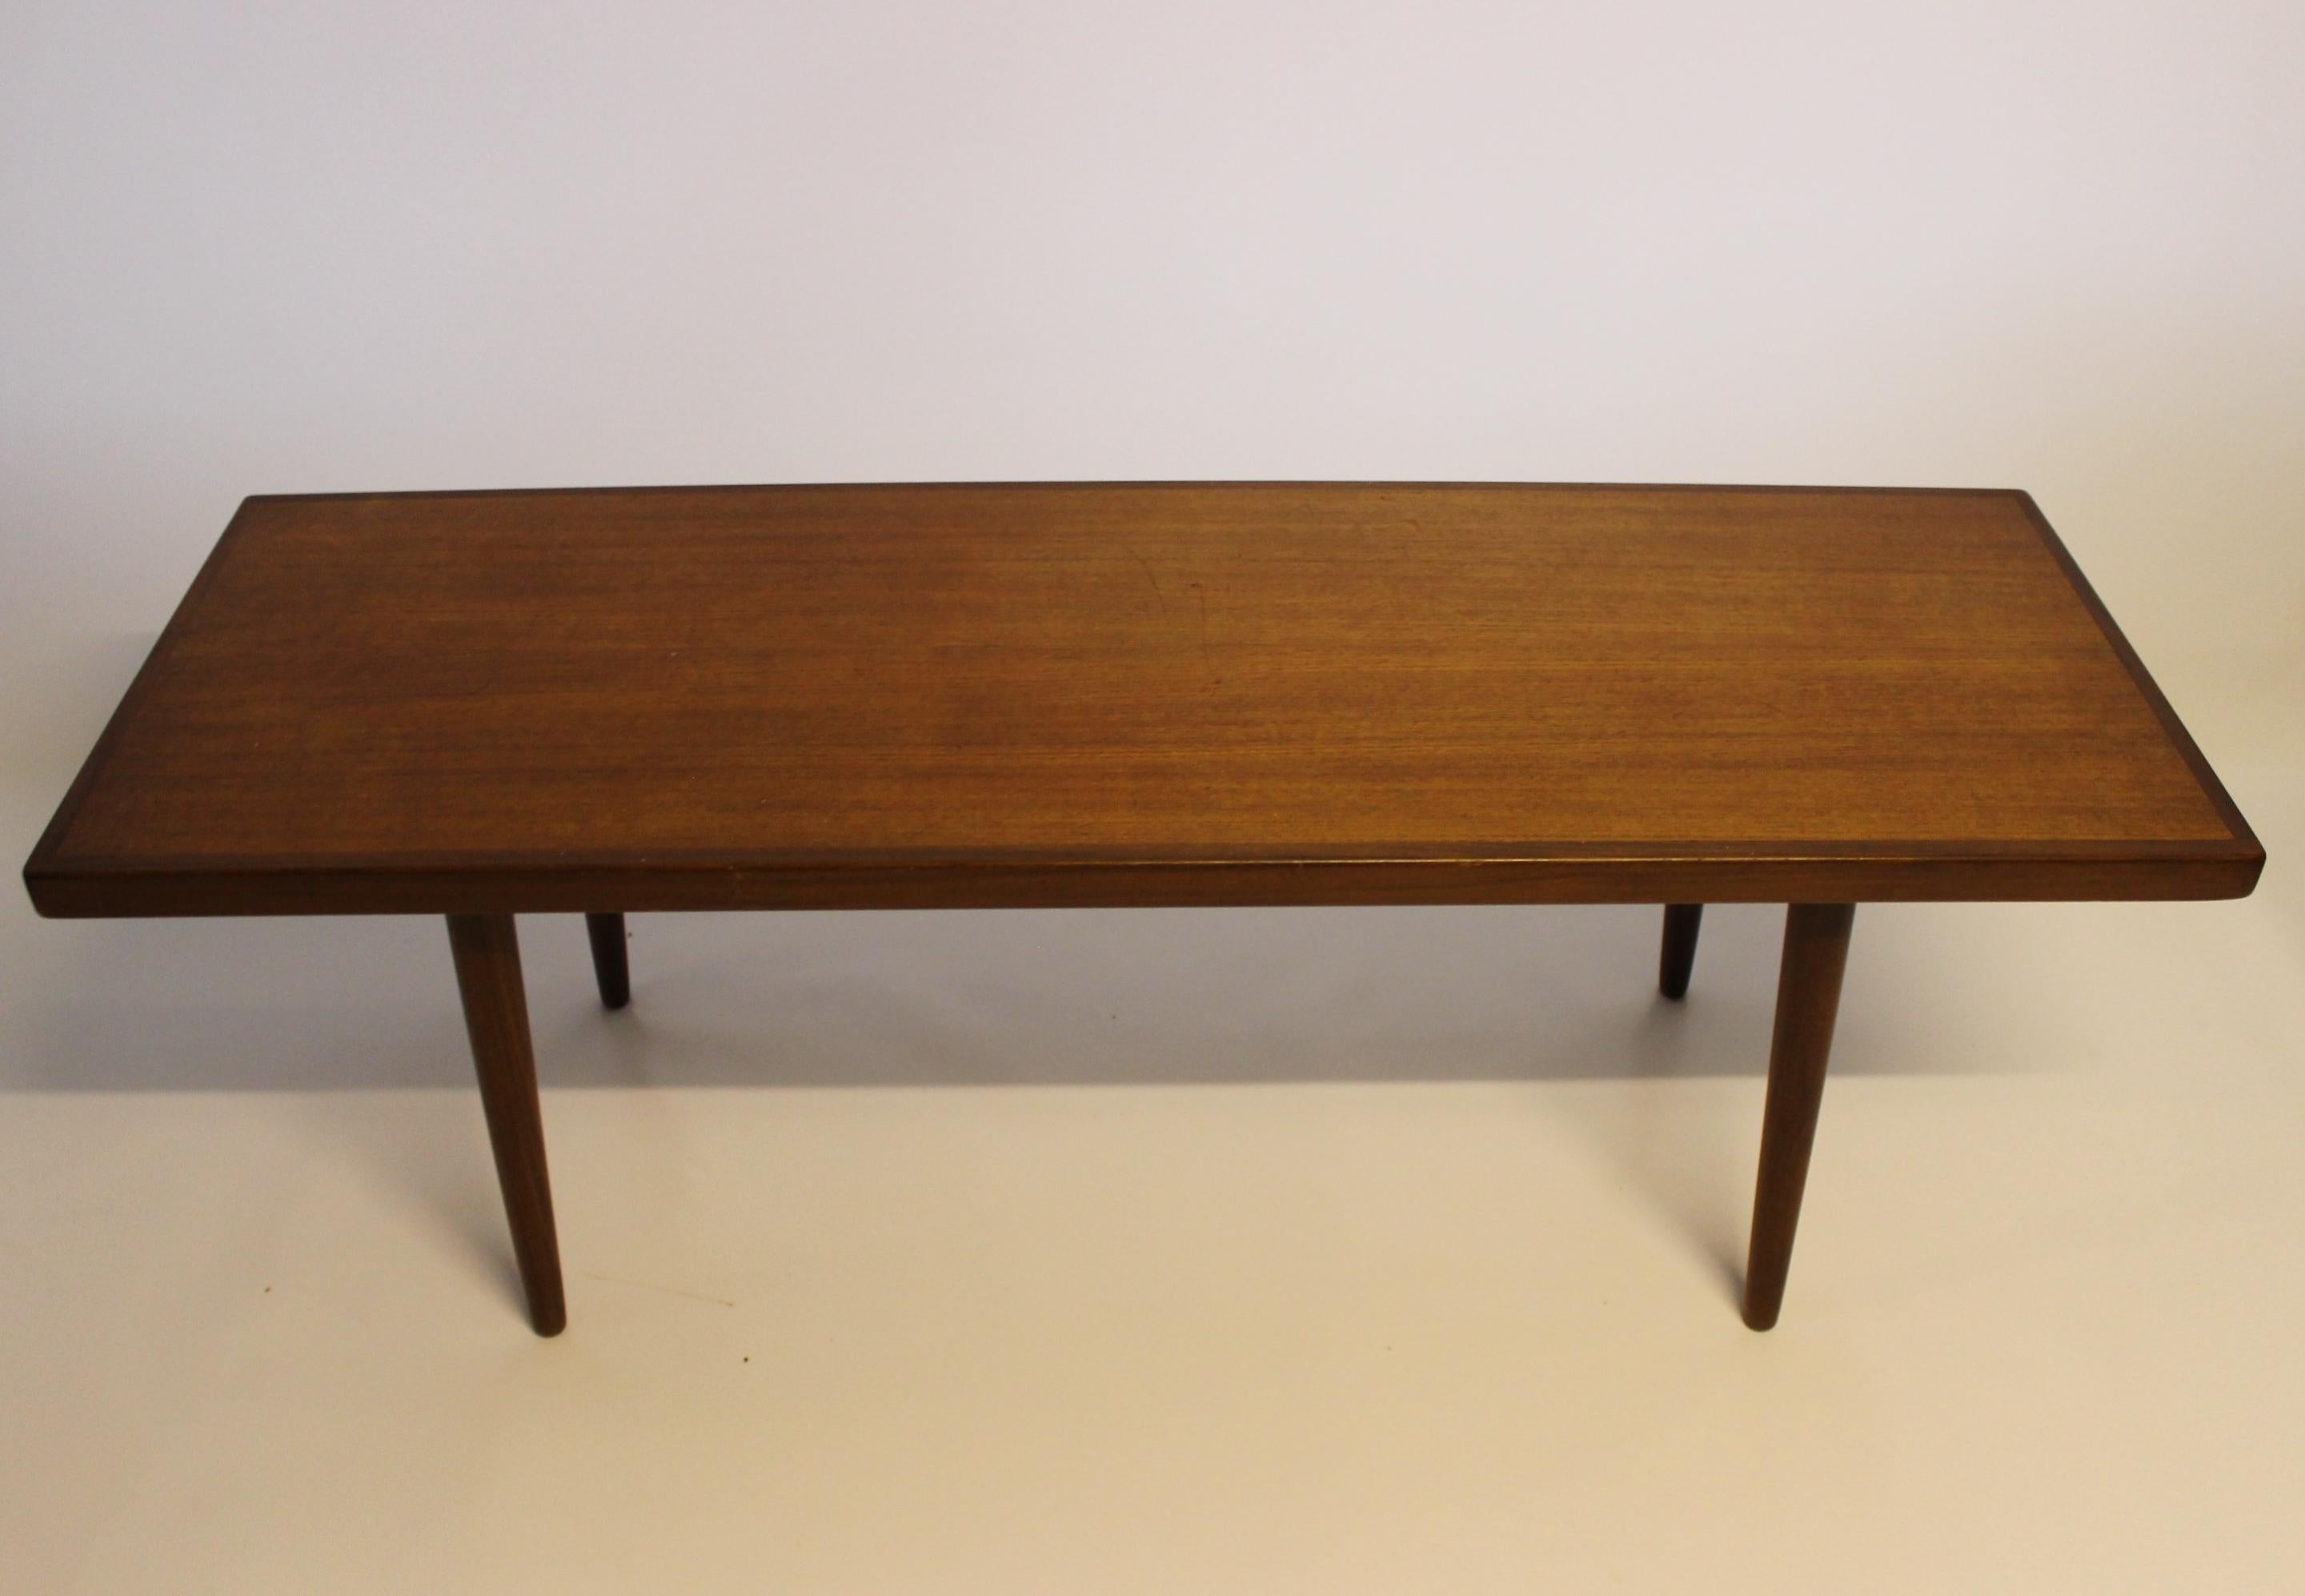 Scandinavian Modern Coffee Table in Teak of Danish Design from the 1960s For Sale